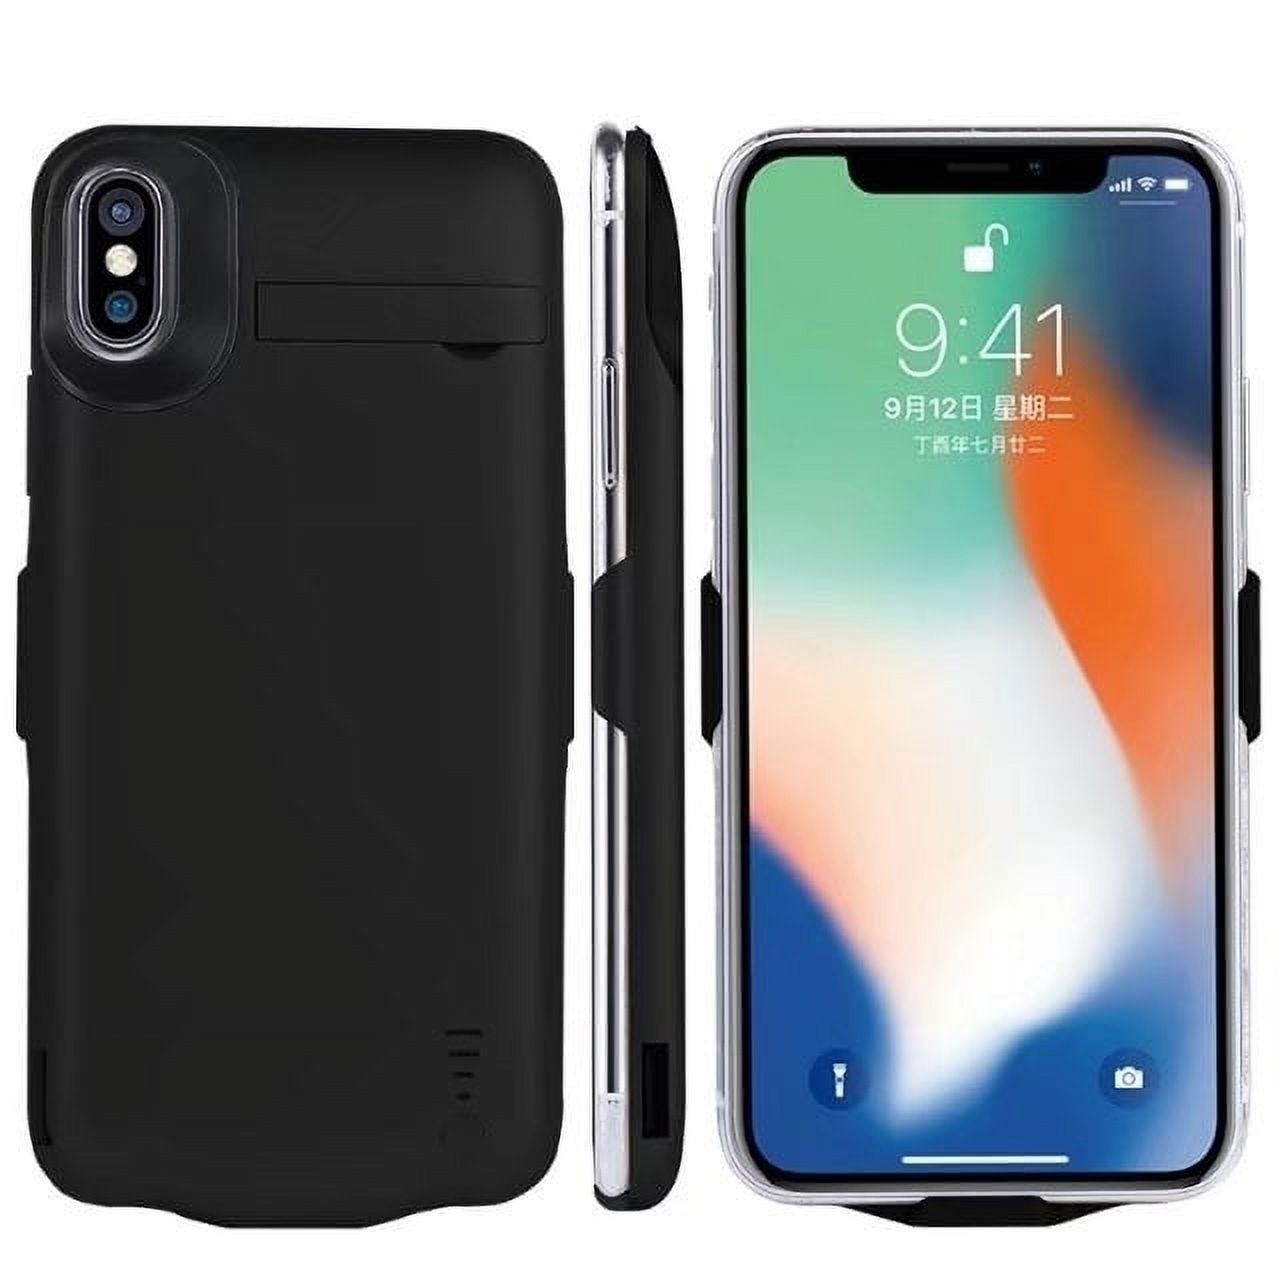 Apple IPhone X / IPhone XS Rechargeable External Battery Portable Power Charger Protective Charging Case 5000mAh with Stand - image 1 of 4